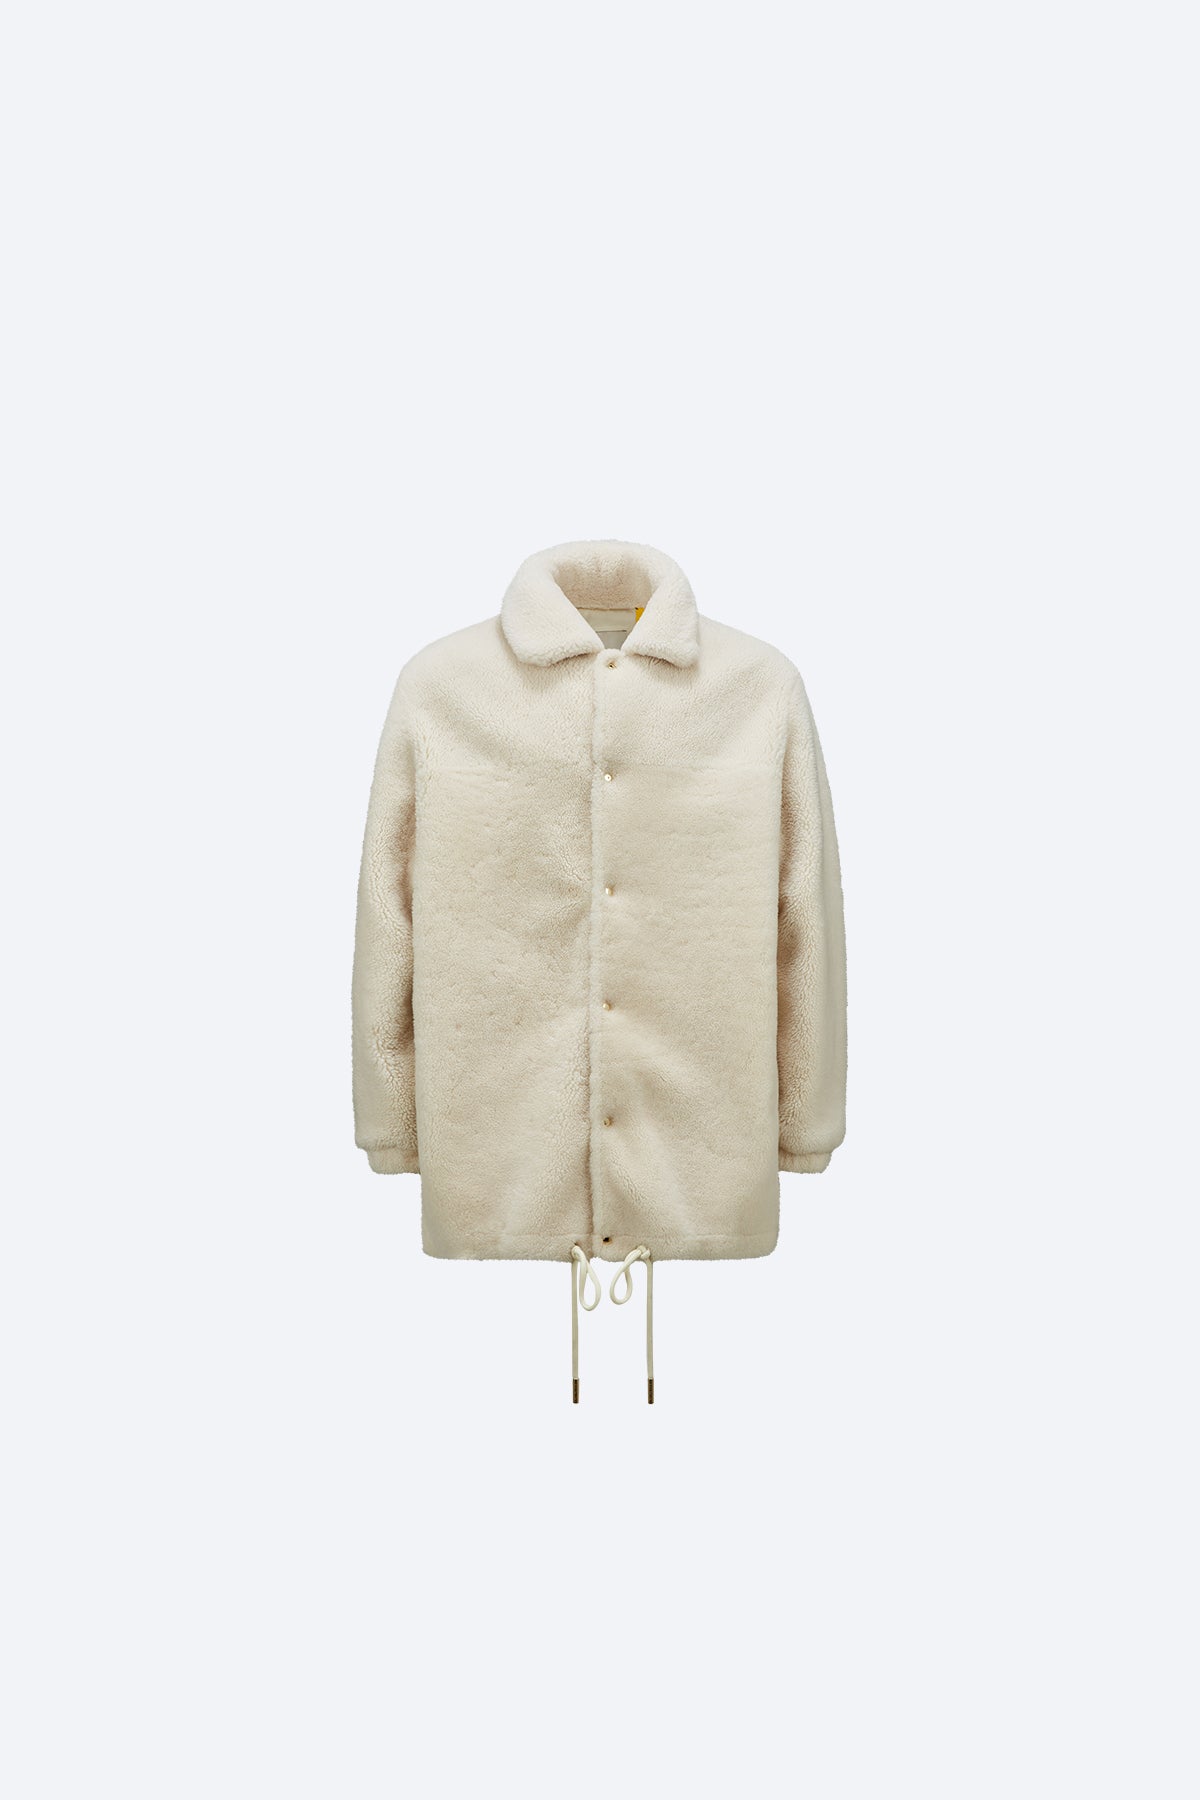 MONCLER X ROC NATION DESIGNED BY JAY-Z | CEPHEUS SHEARLING JACKET